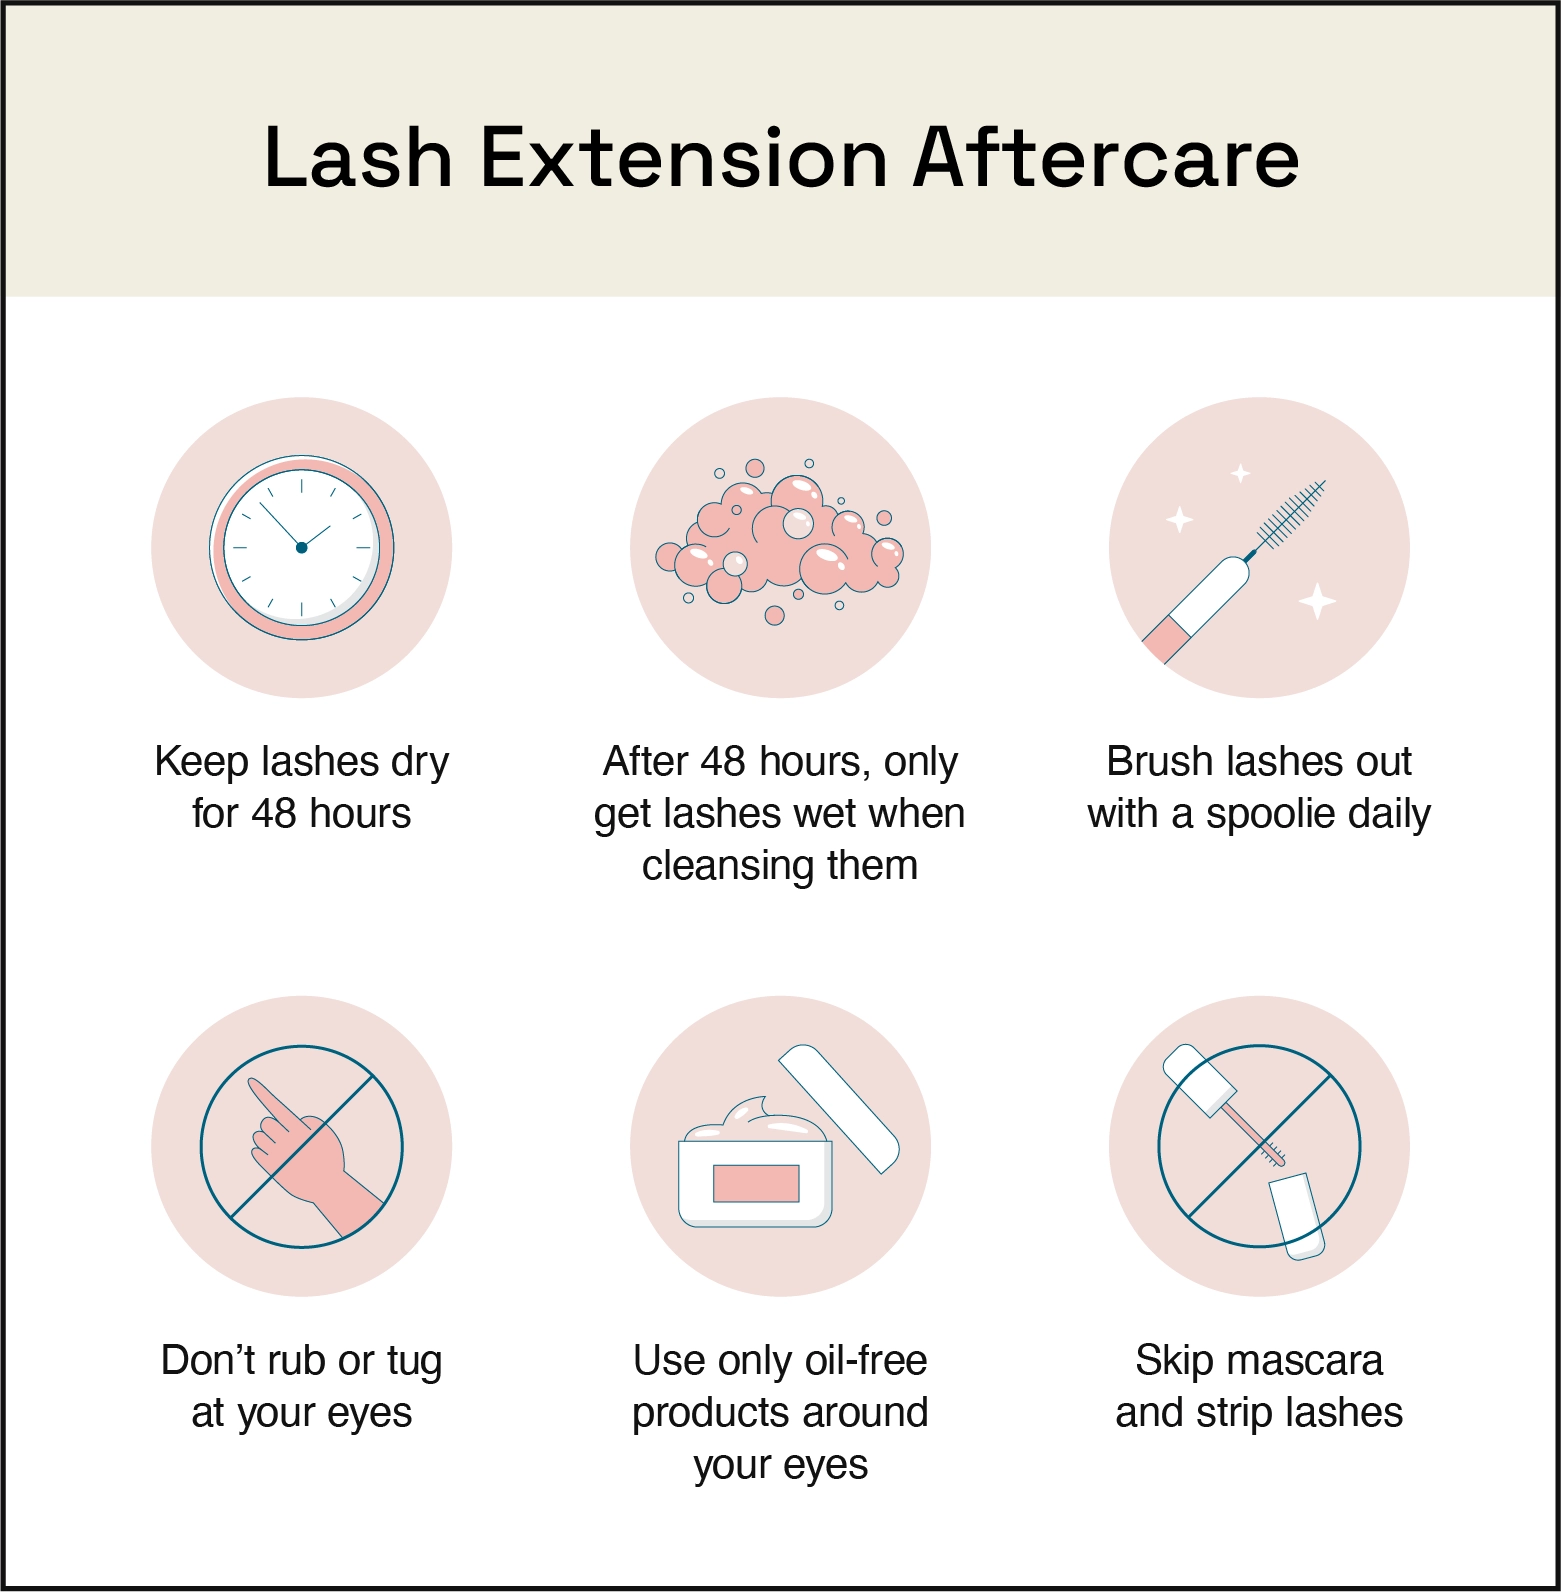 After getting lash extensions you should keep your lashes dry for 48 hours, avoid getting them wet after 48 hours except to clean them daily, brush your lashes daily with a spoolie, avoid rubbing your eyes, avoid any oil-based products around your eyes, and skip mascara or strip lashes.